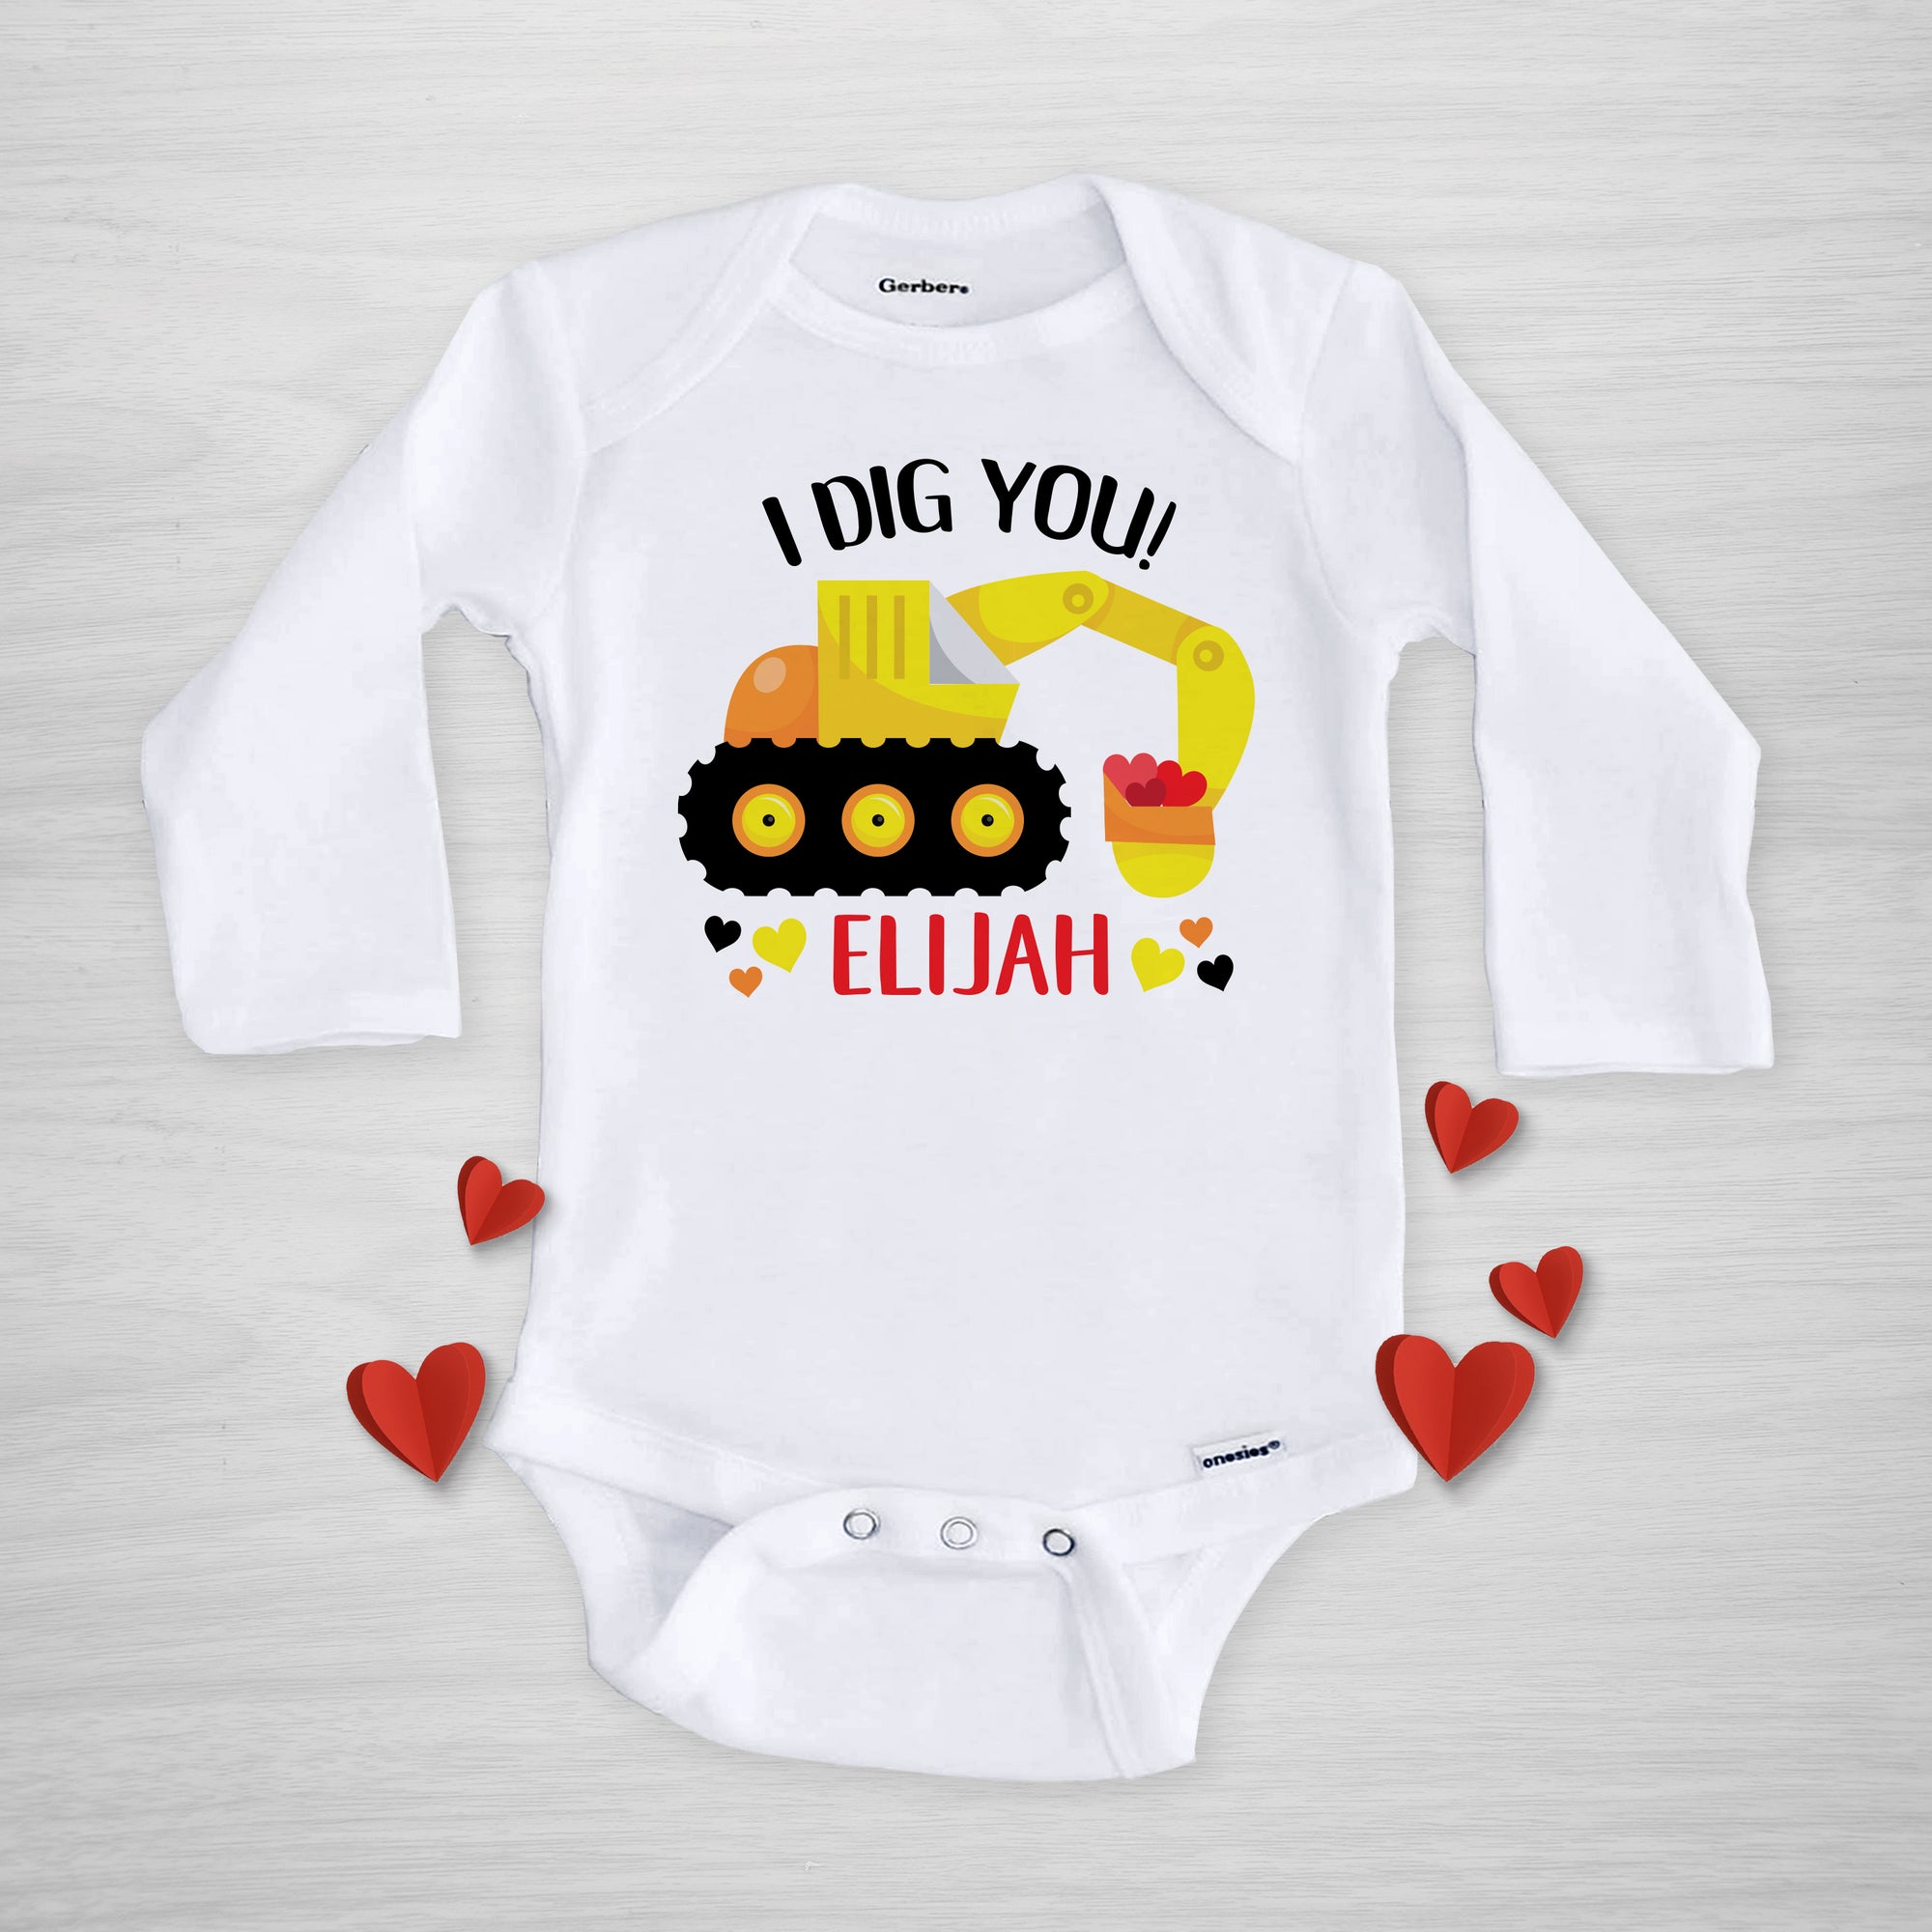 Valentine's Day Personalized Gerber Onesie, backhoe excavator "I dig you" personalized, long sleeve